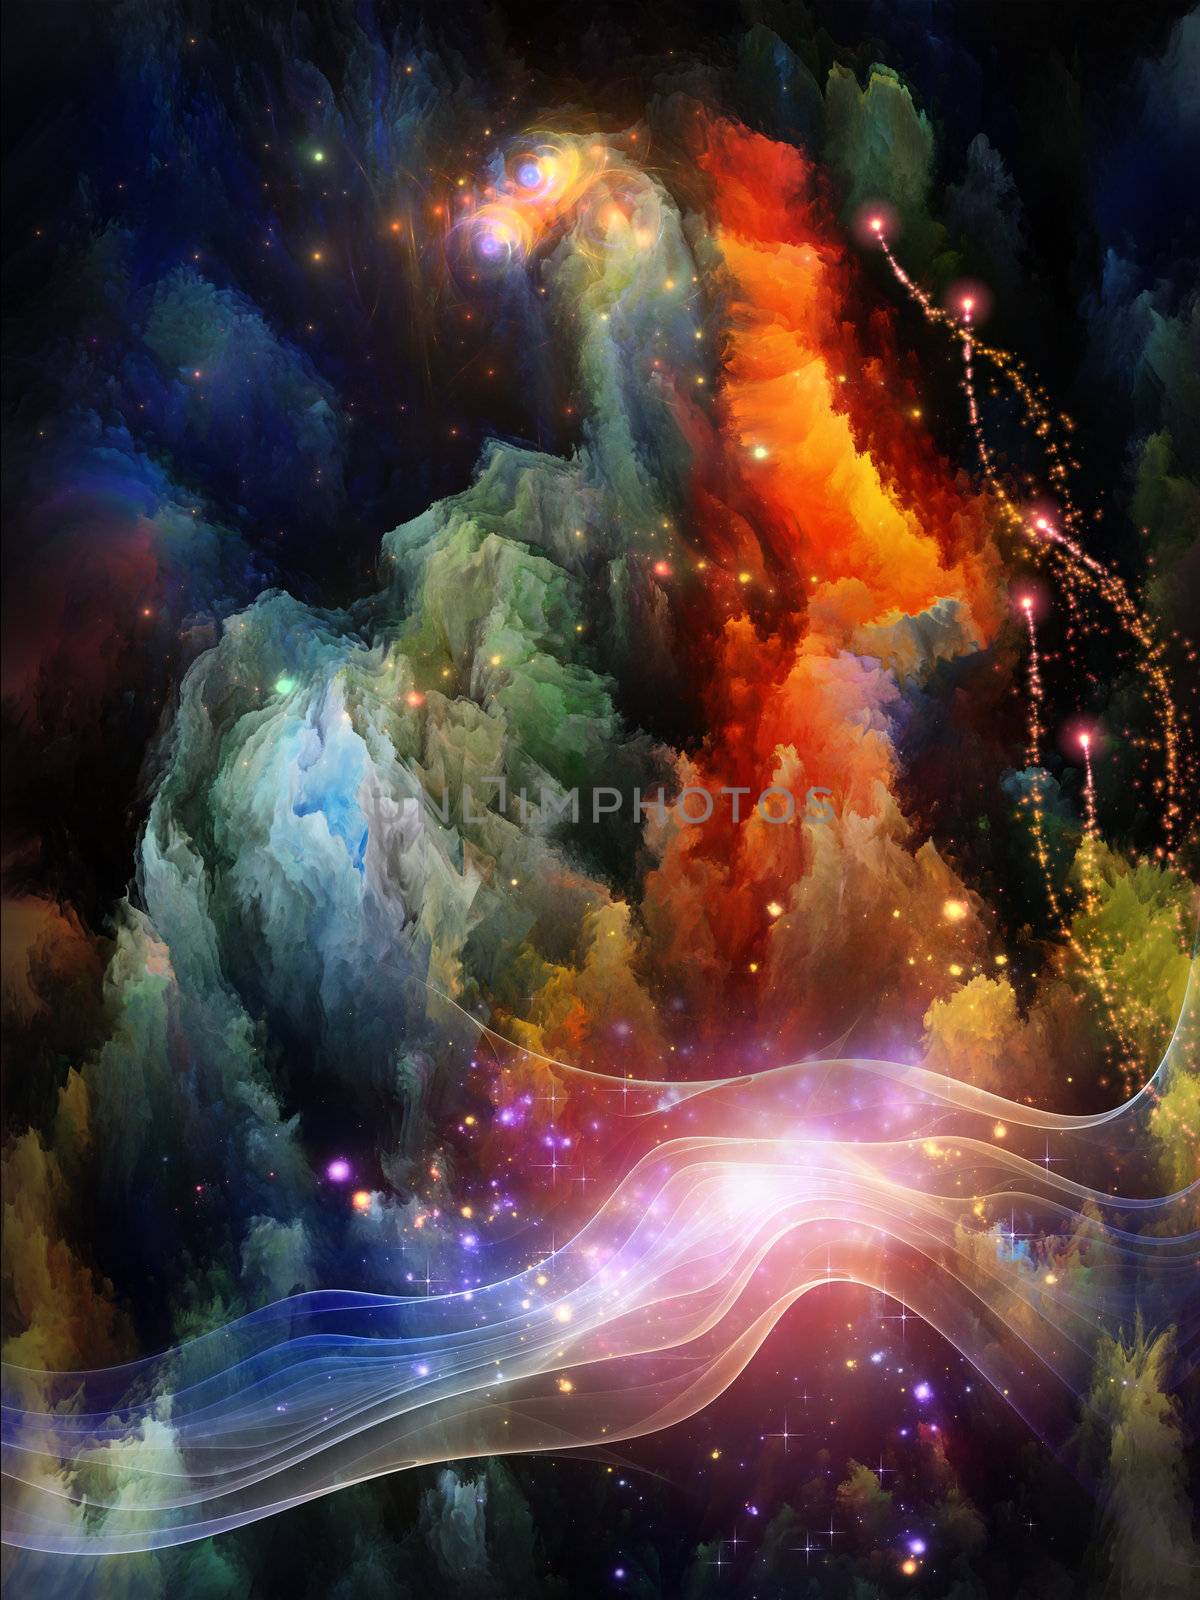 Never Worlds series. Design composed of colorful dimensional fractal worlds as a metaphor on the subject of fantasy, dreams, creativity,  imagination and art